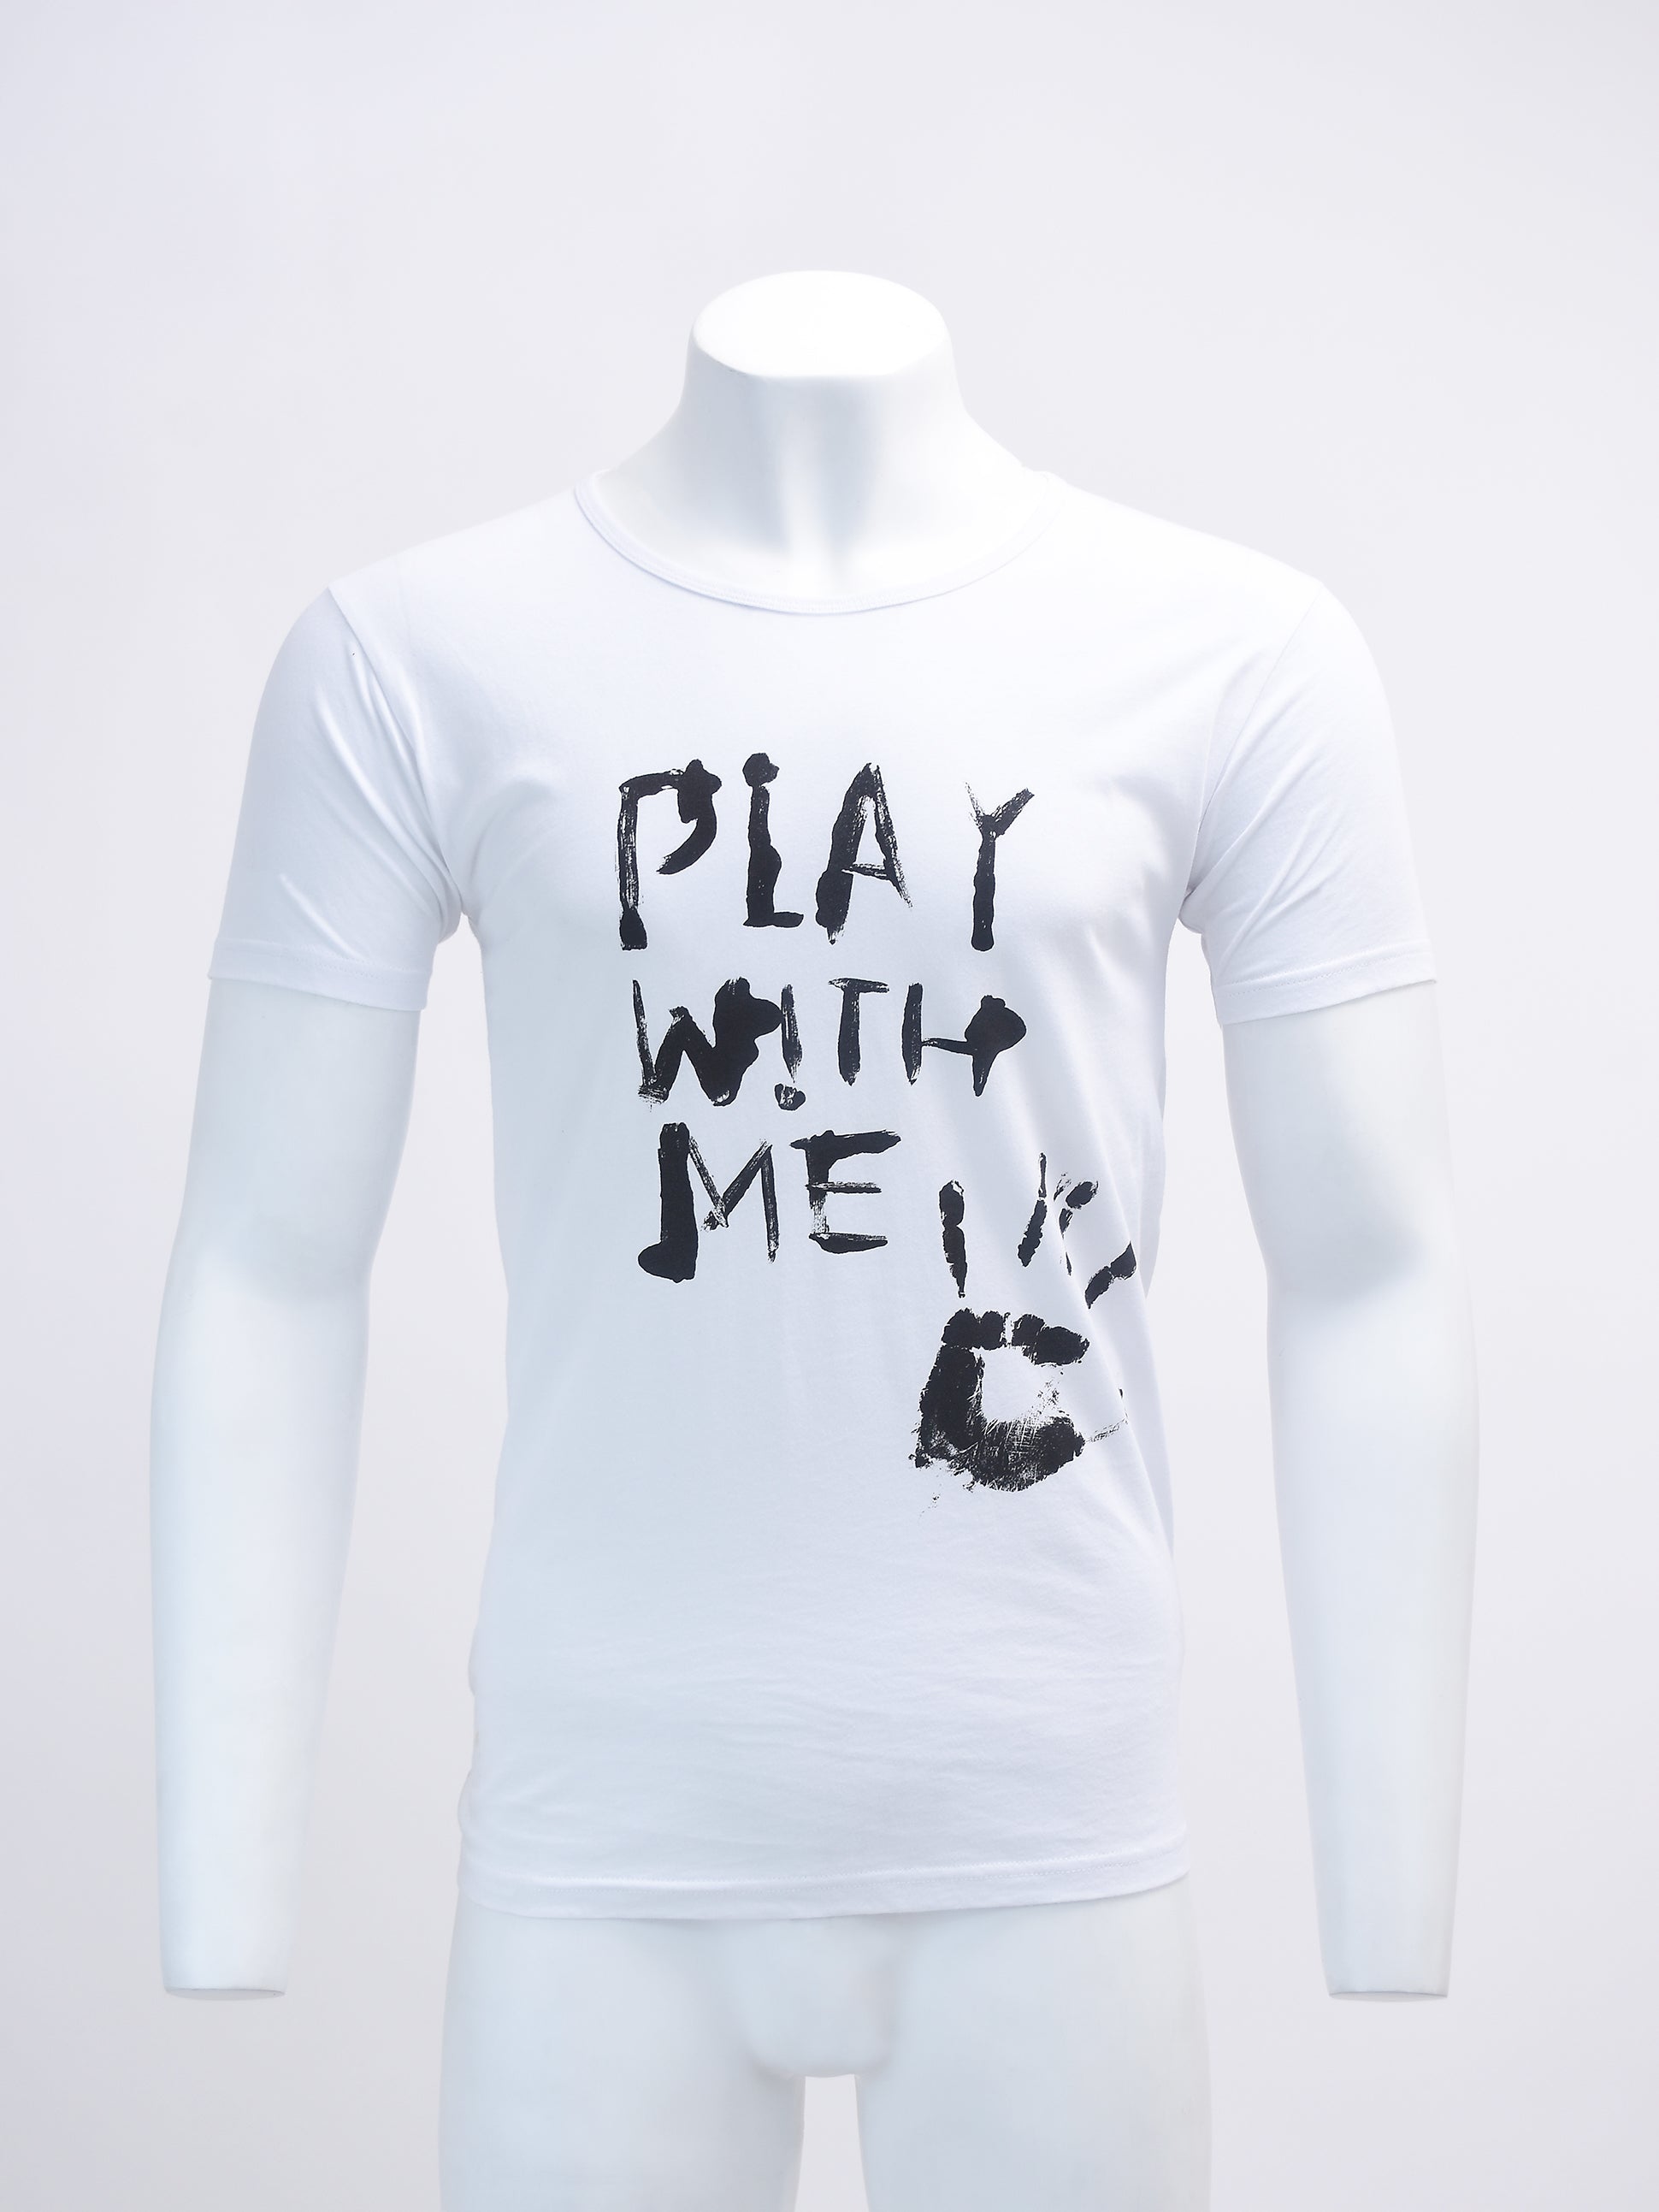 PLAY WITH ME T-SHIRT